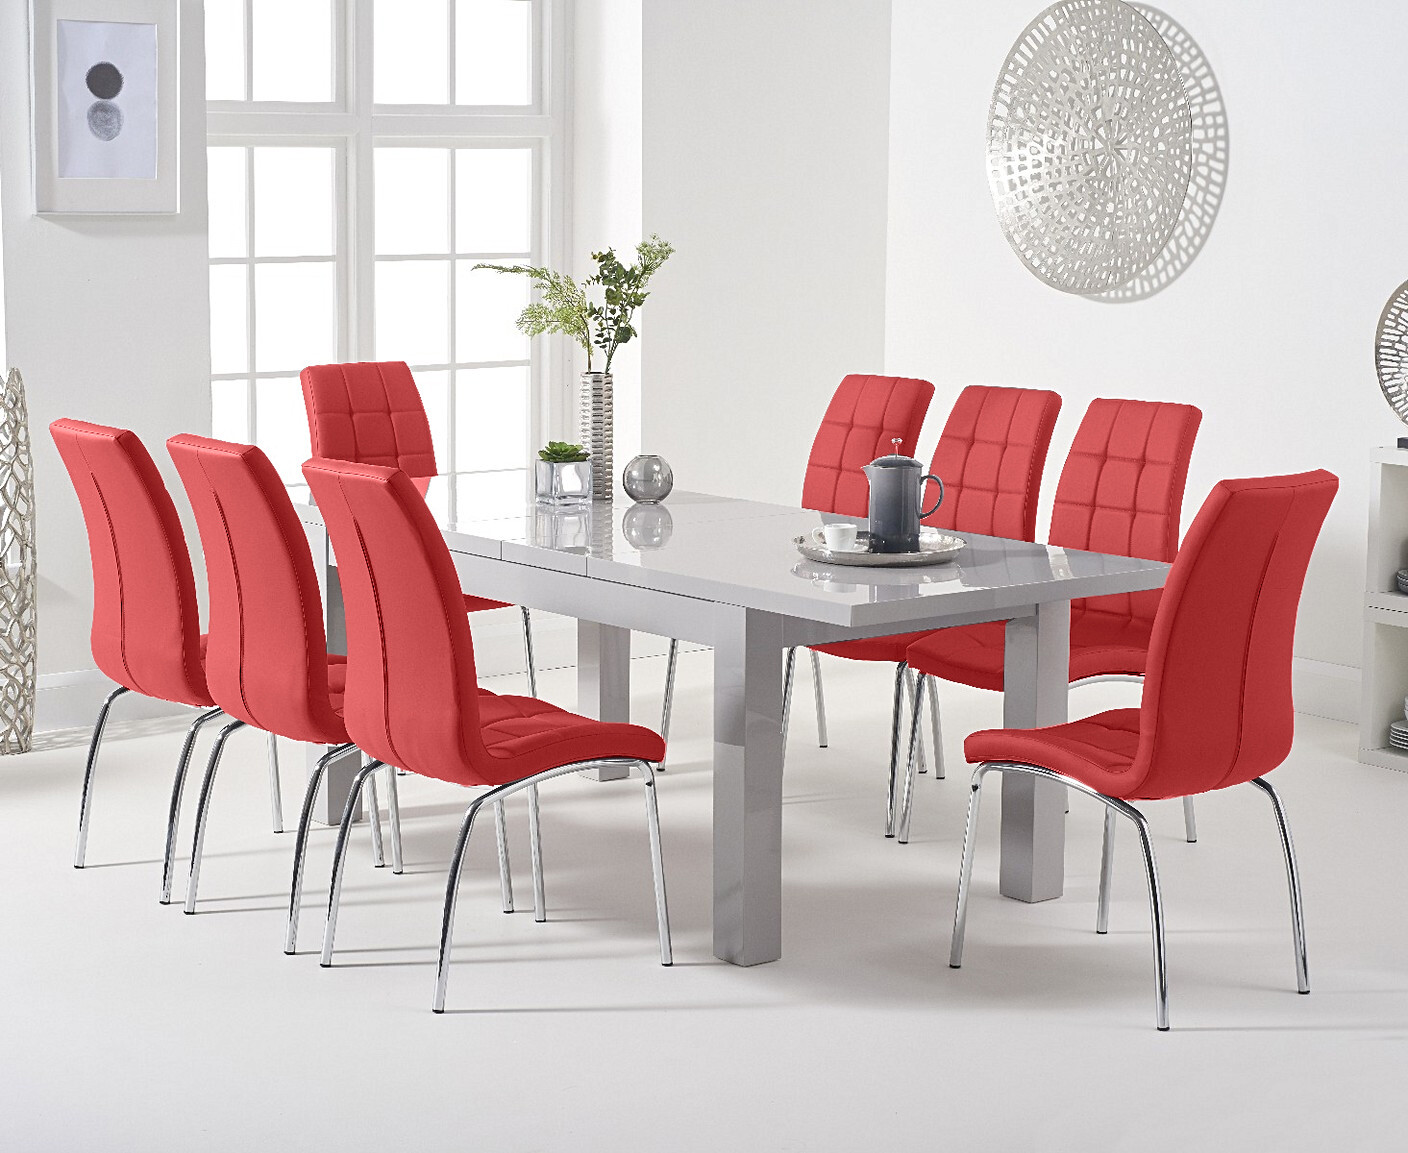 Extending Seattle 160cm Light Grey High Gloss Dining Table With 8 Cream Enzo Chairs